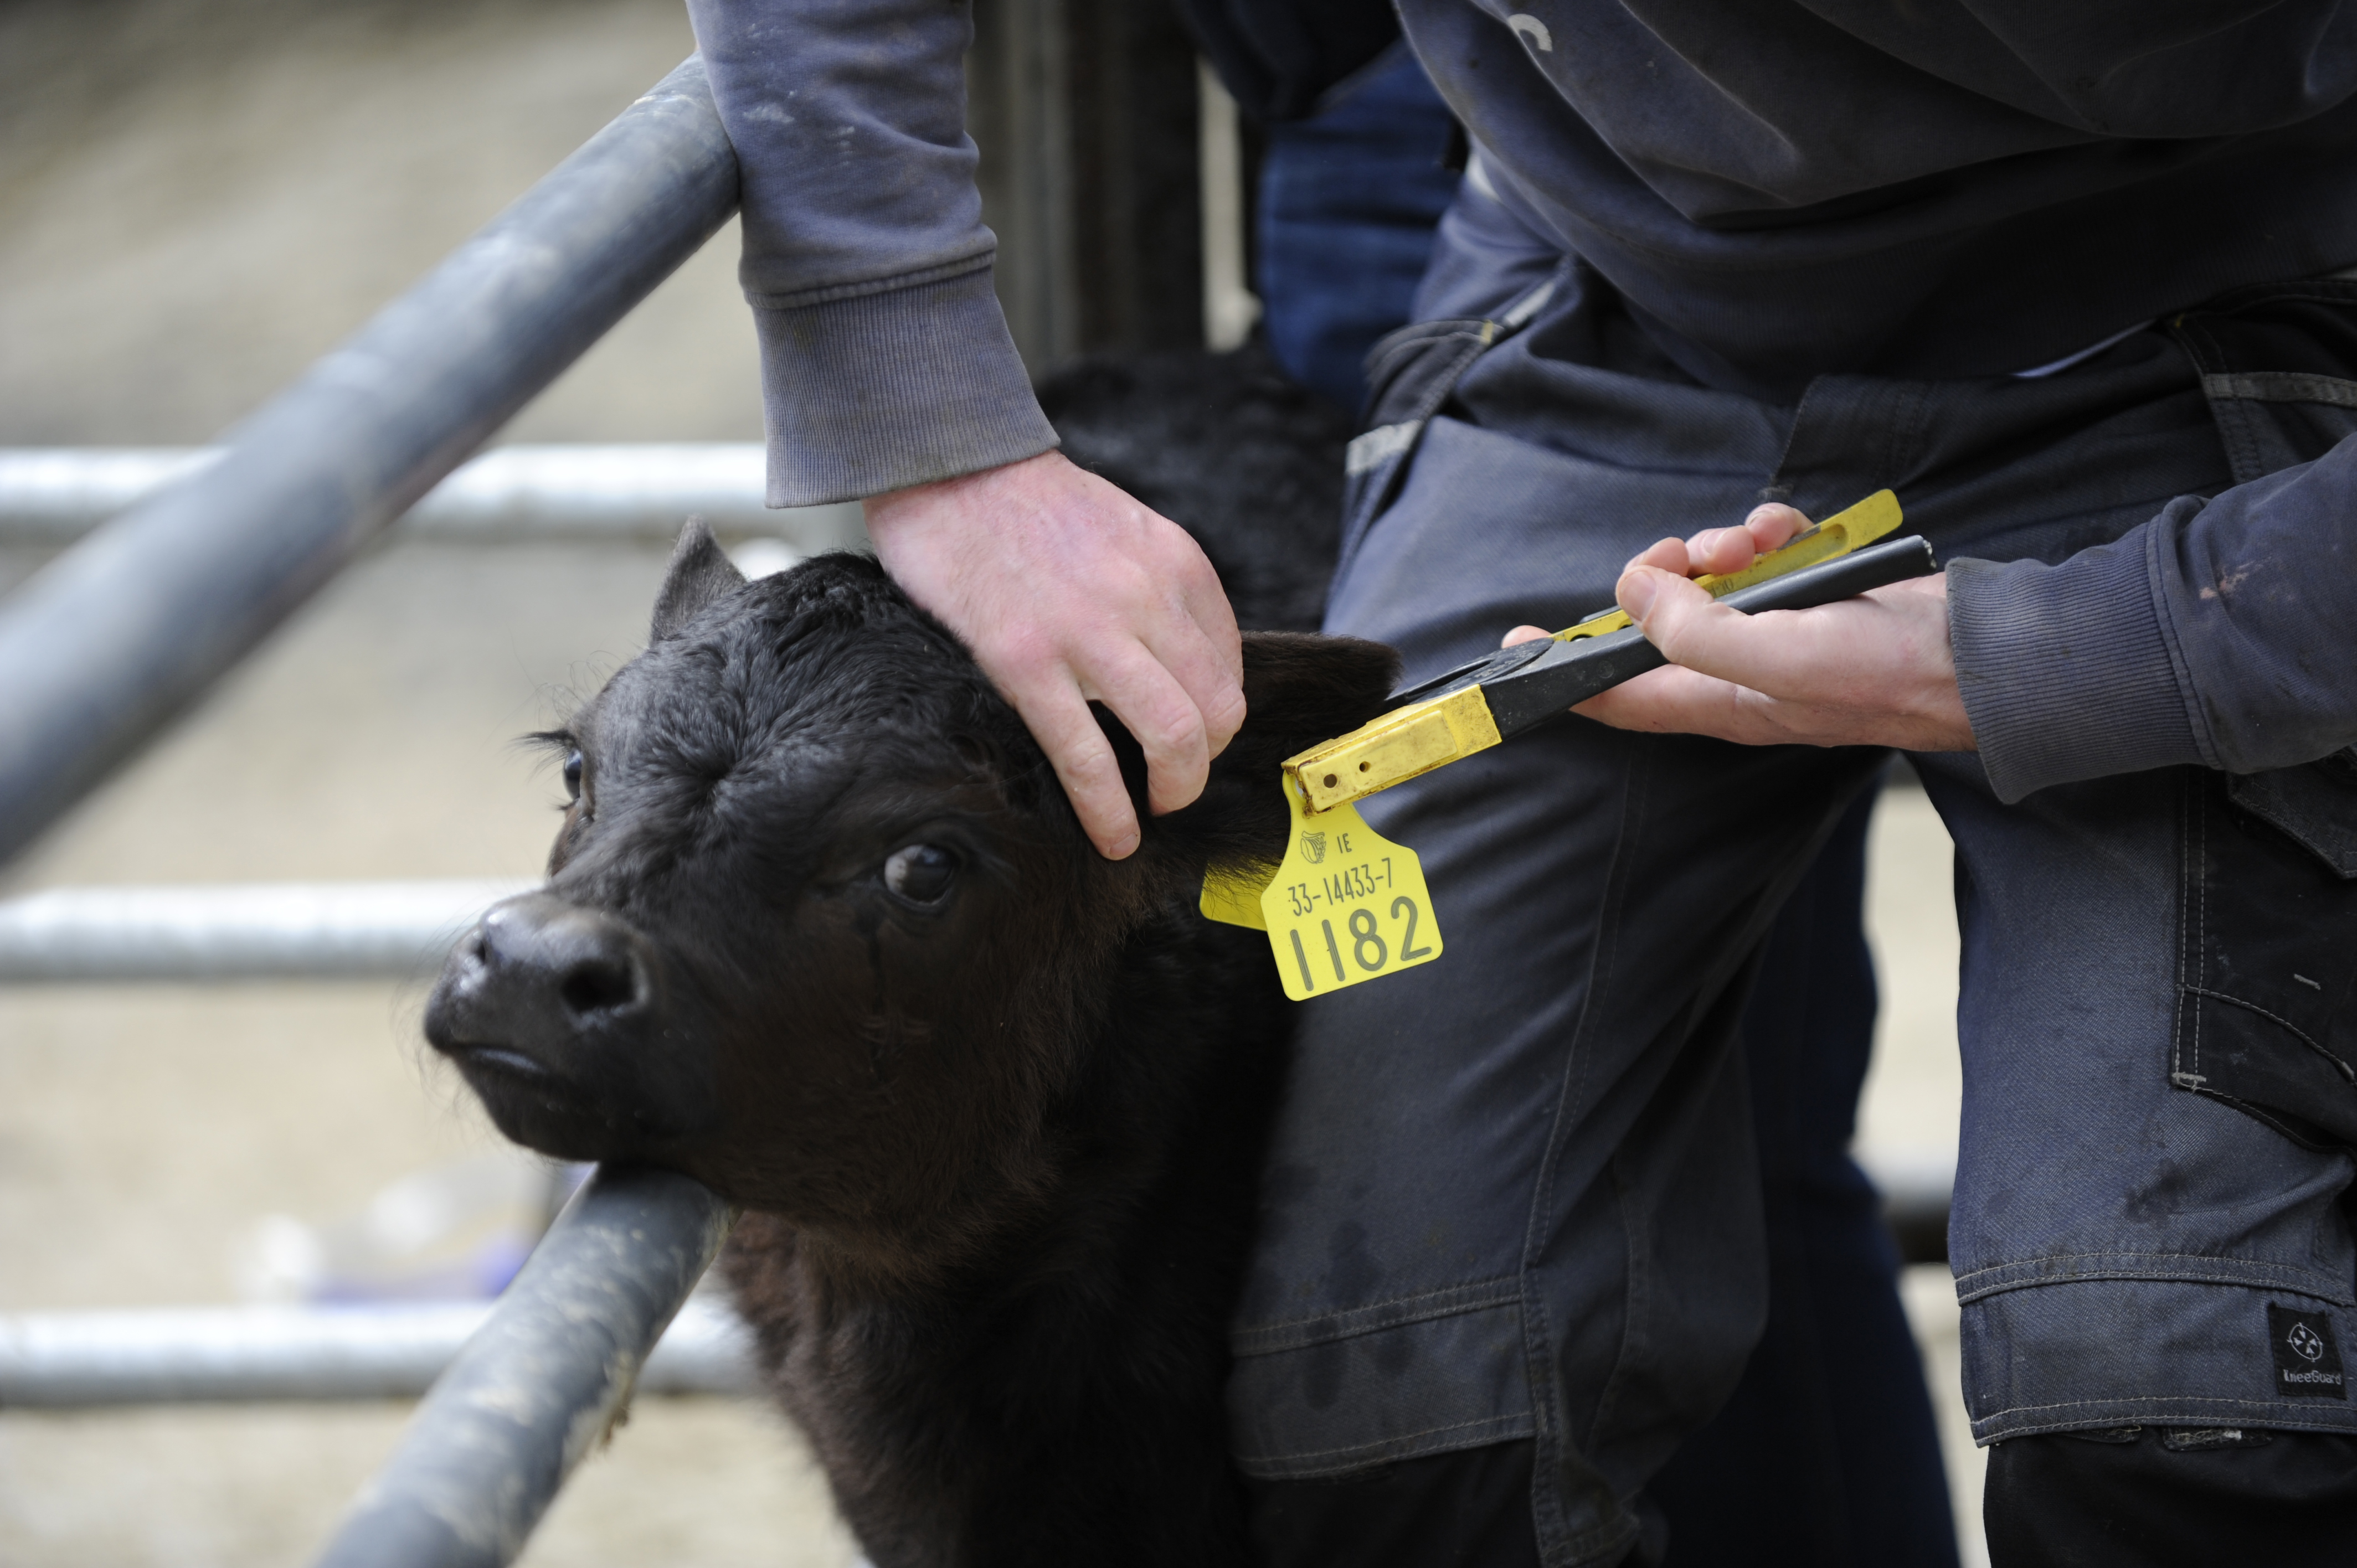 Tagging calves herdwatch